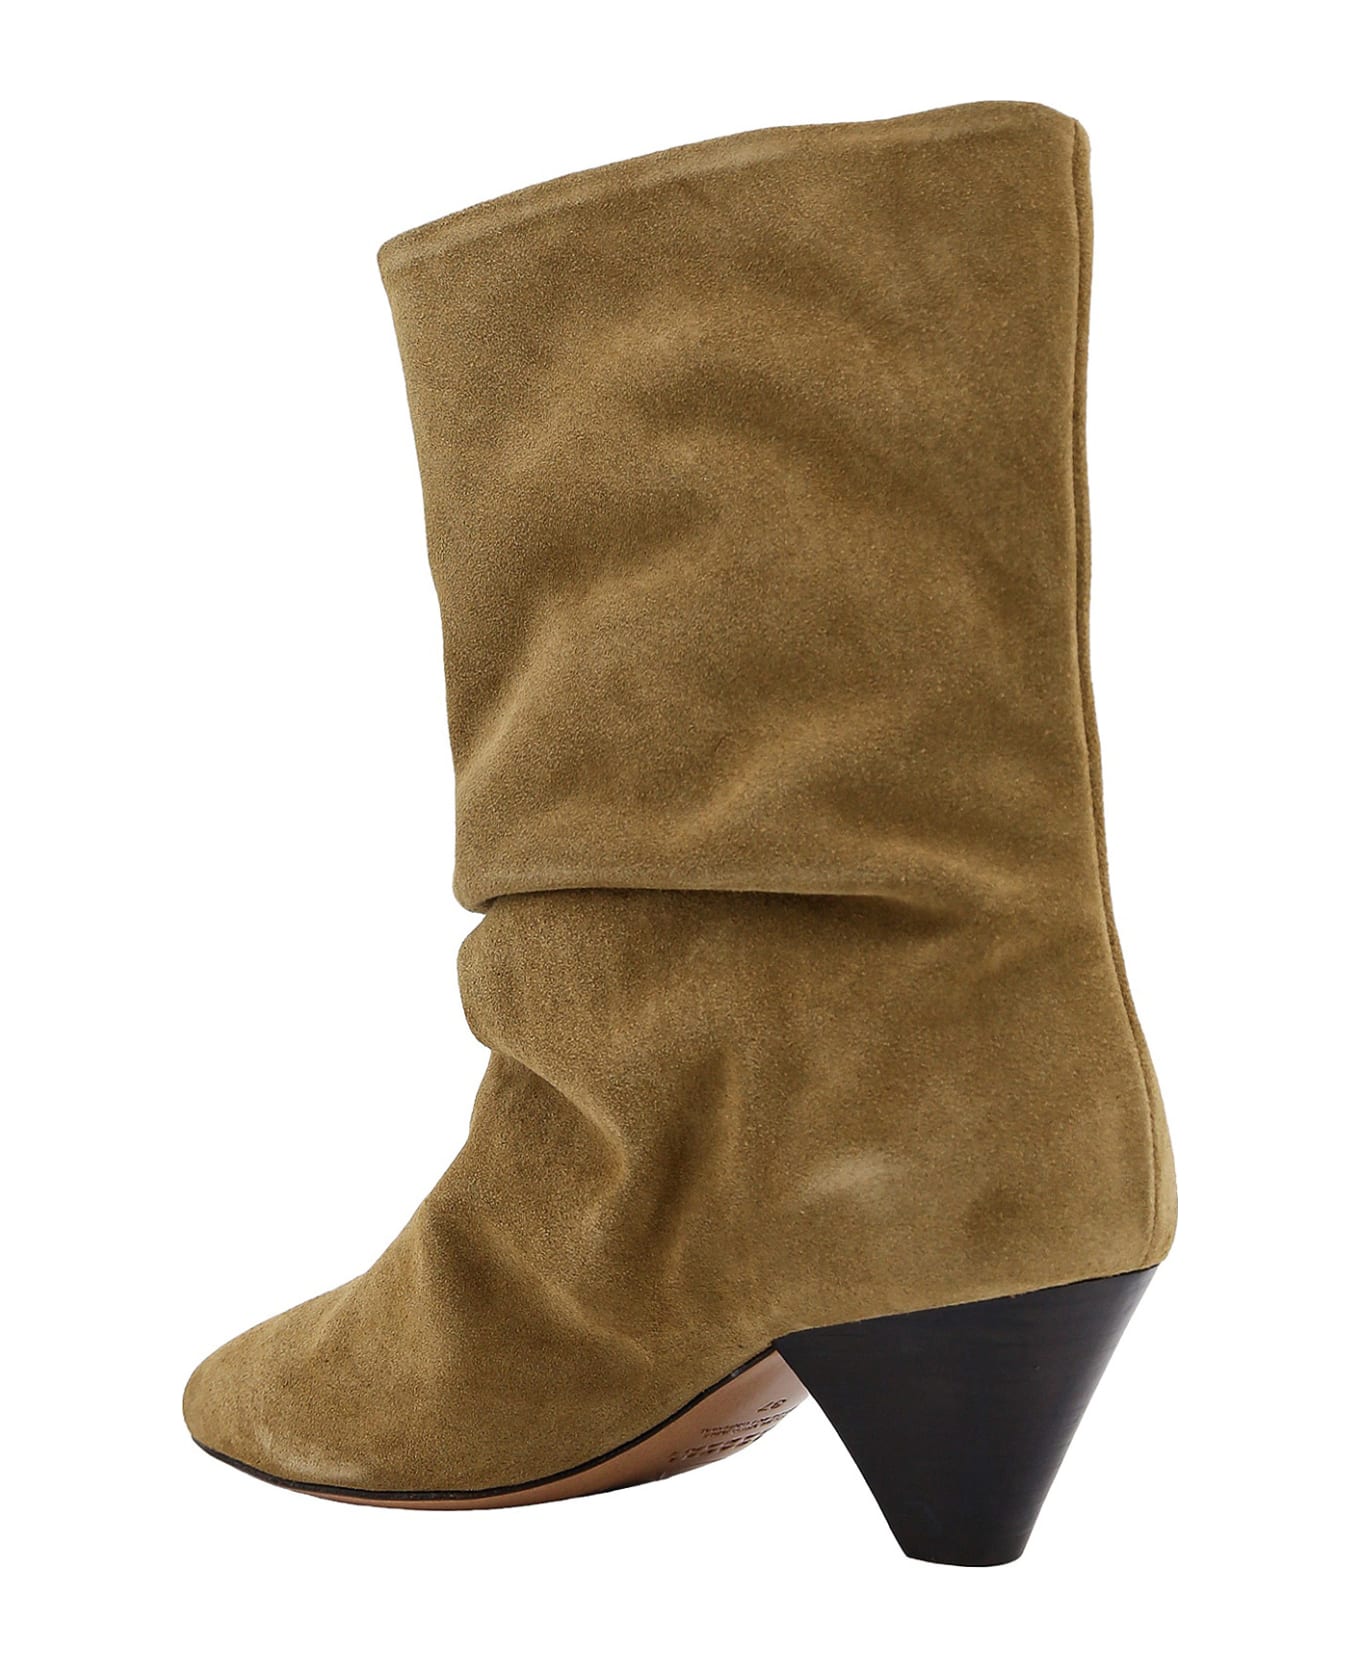 Isabel Marant Reachi Ankle Boots - Dove Grey